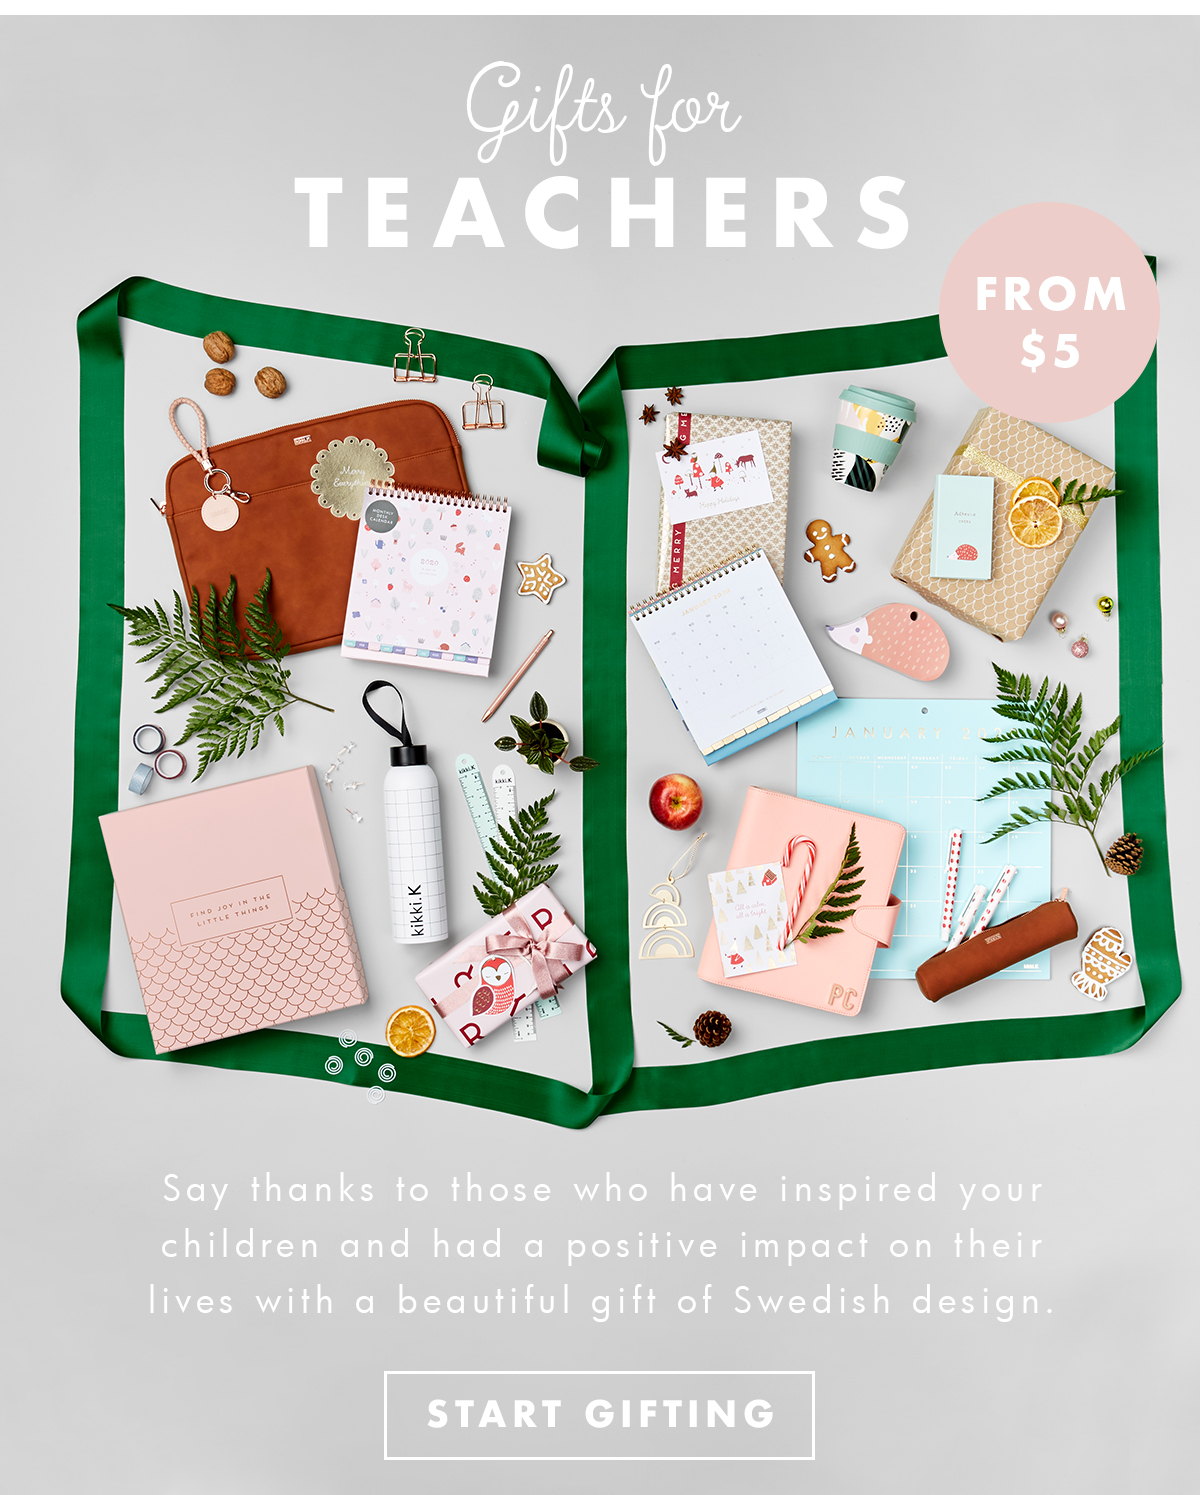 Gifts for teachers! Starting from just $5. 